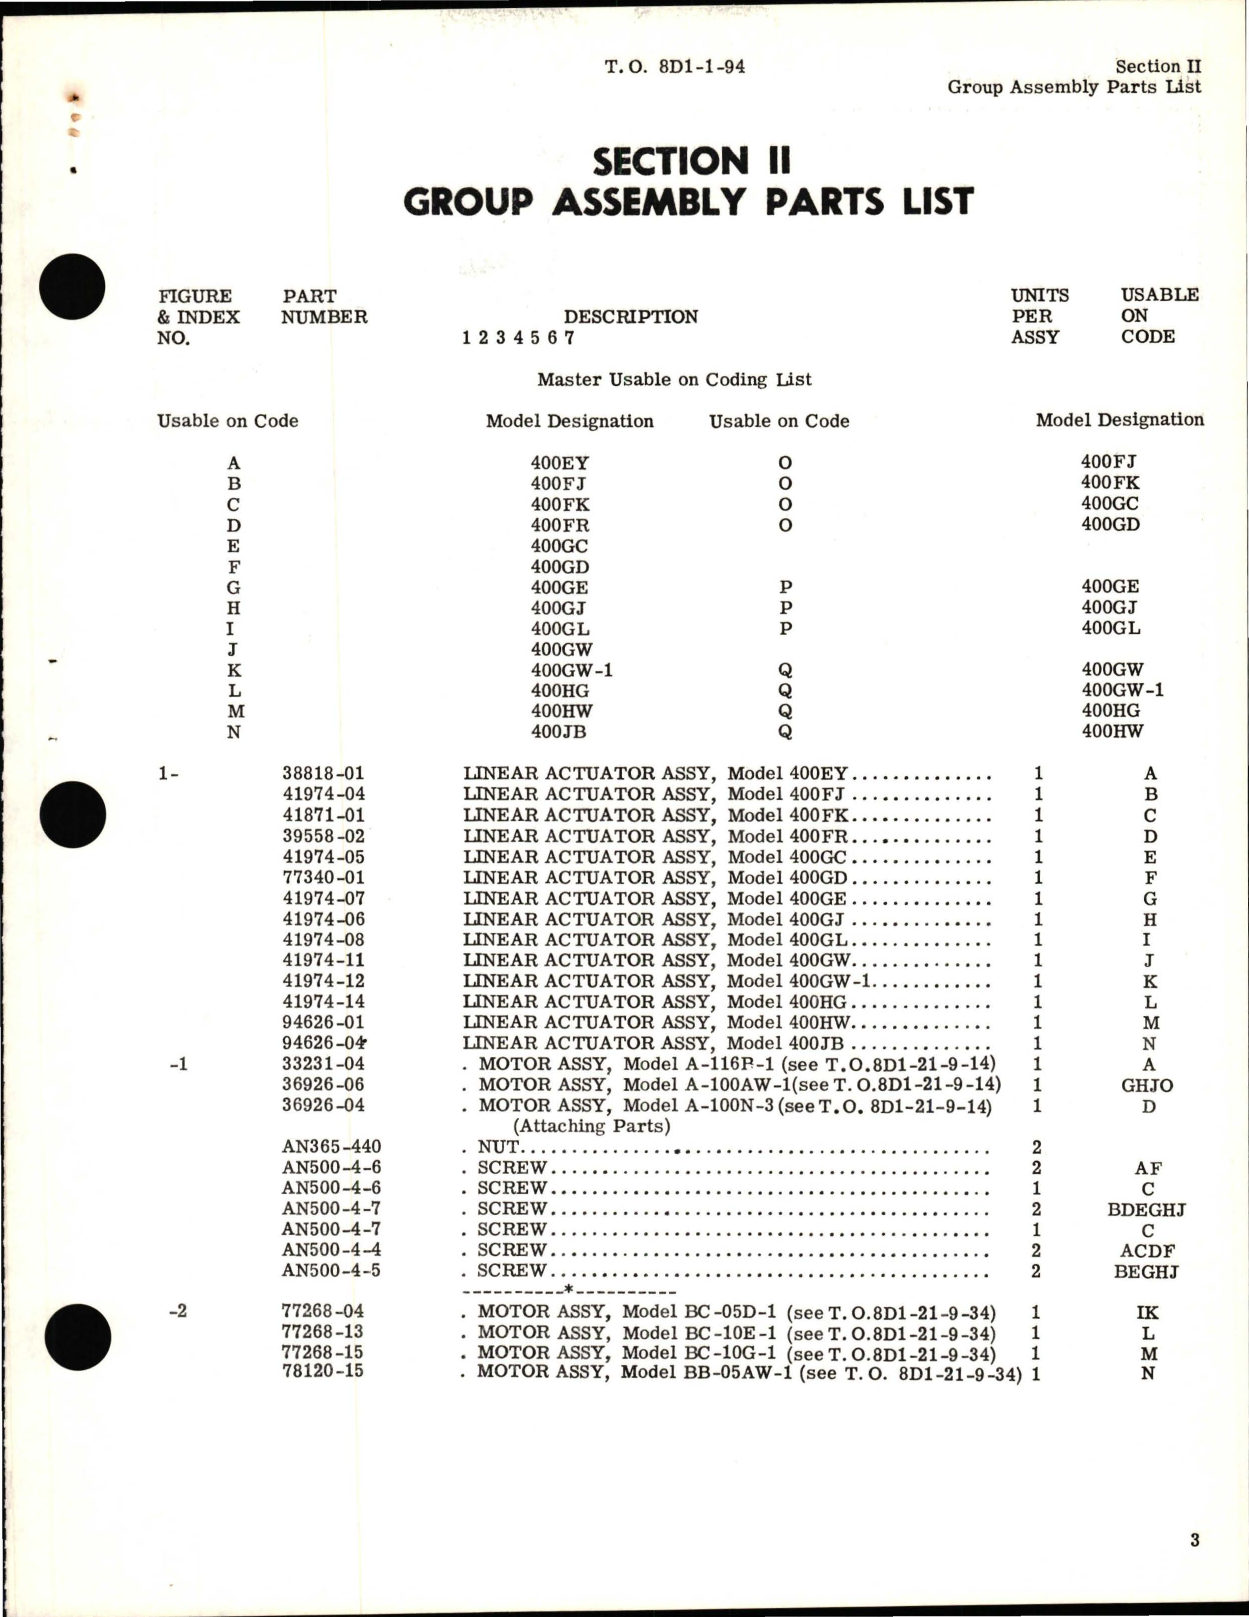 Sample page 7 from AirCorps Library document: Illustrated Parts Breakdown for Linear Actuator Assembly Model 400 Series